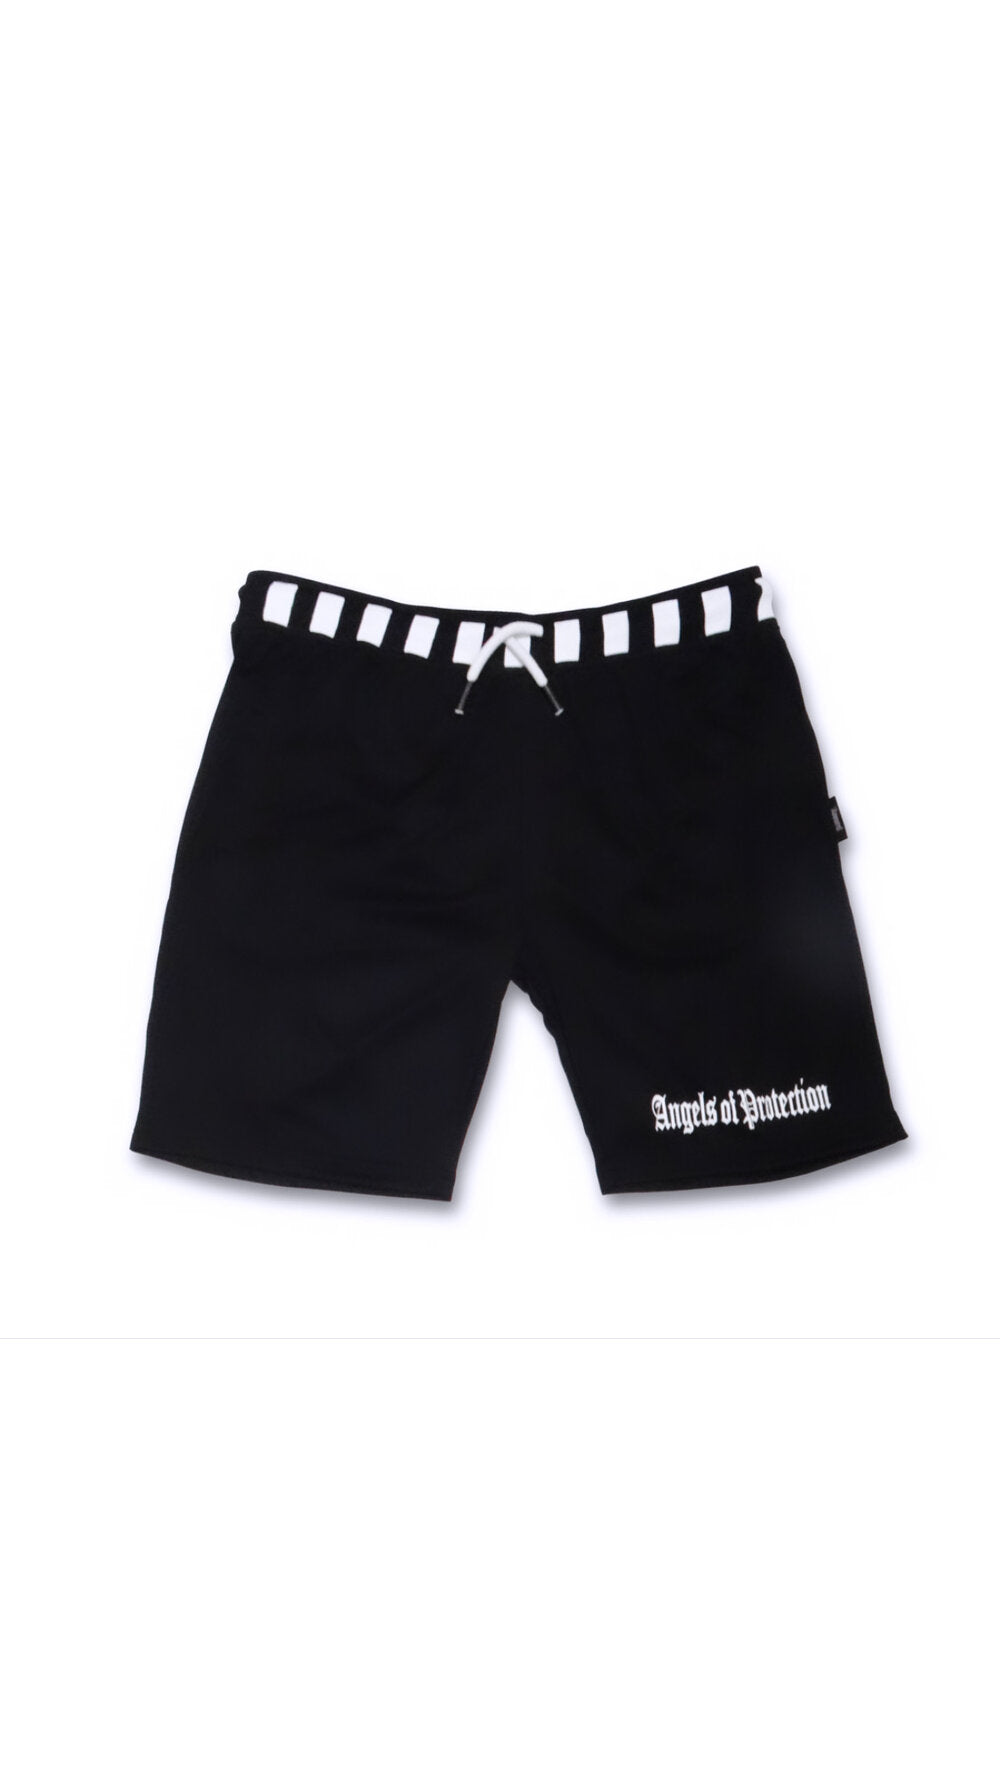 Angels of Protection Shorts